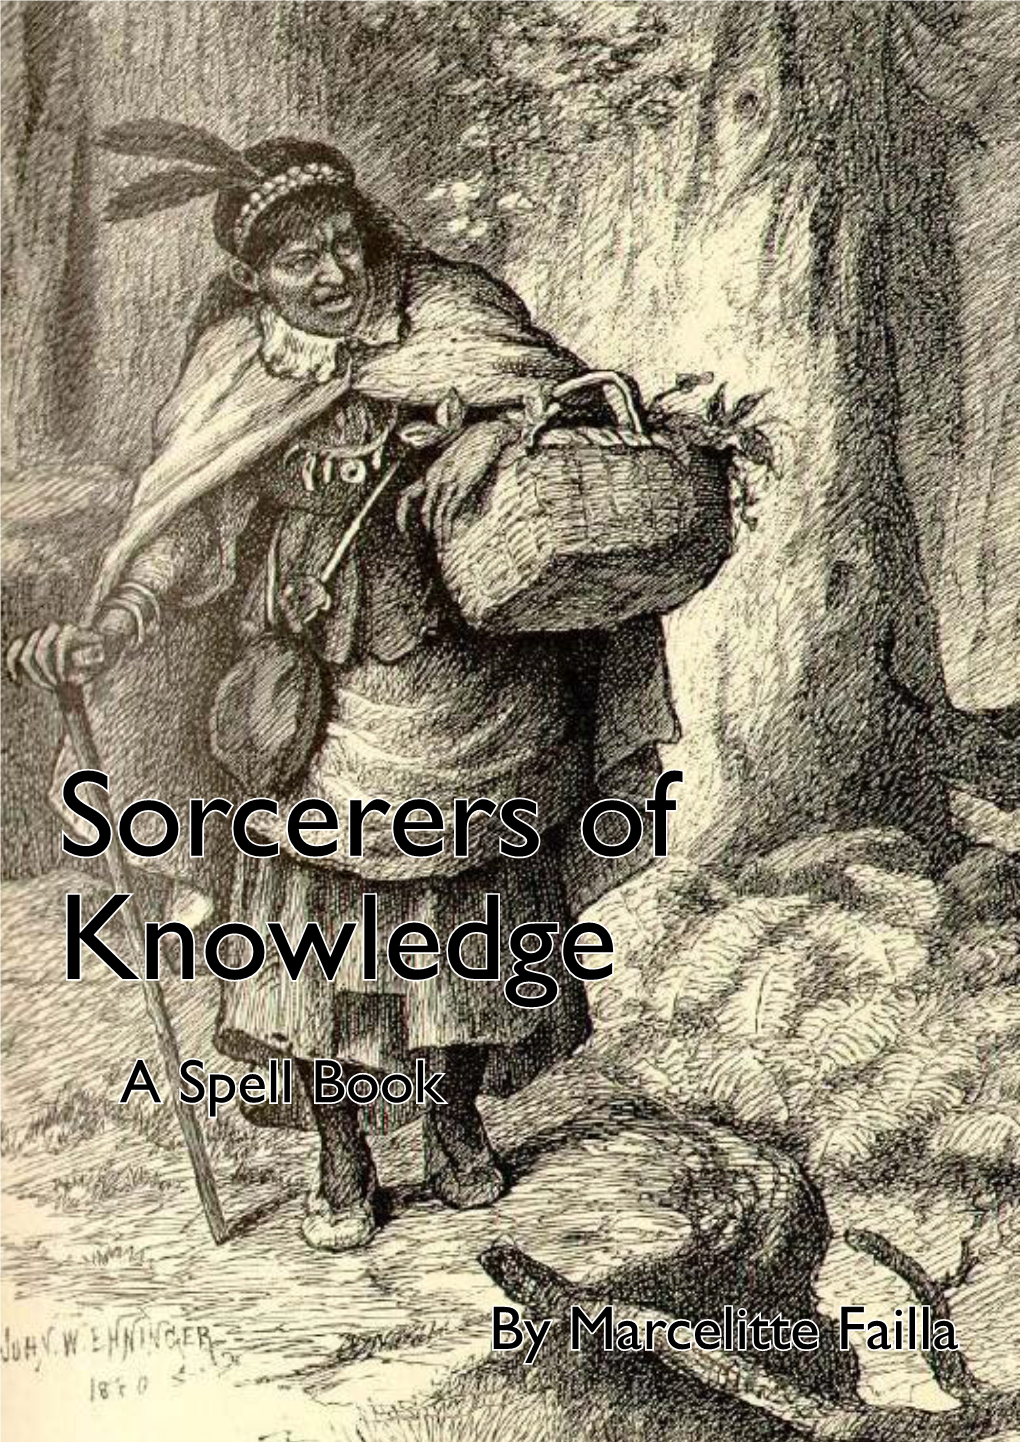 Sorcerers of Knowledg a Spell Book by Marcelitte Failla